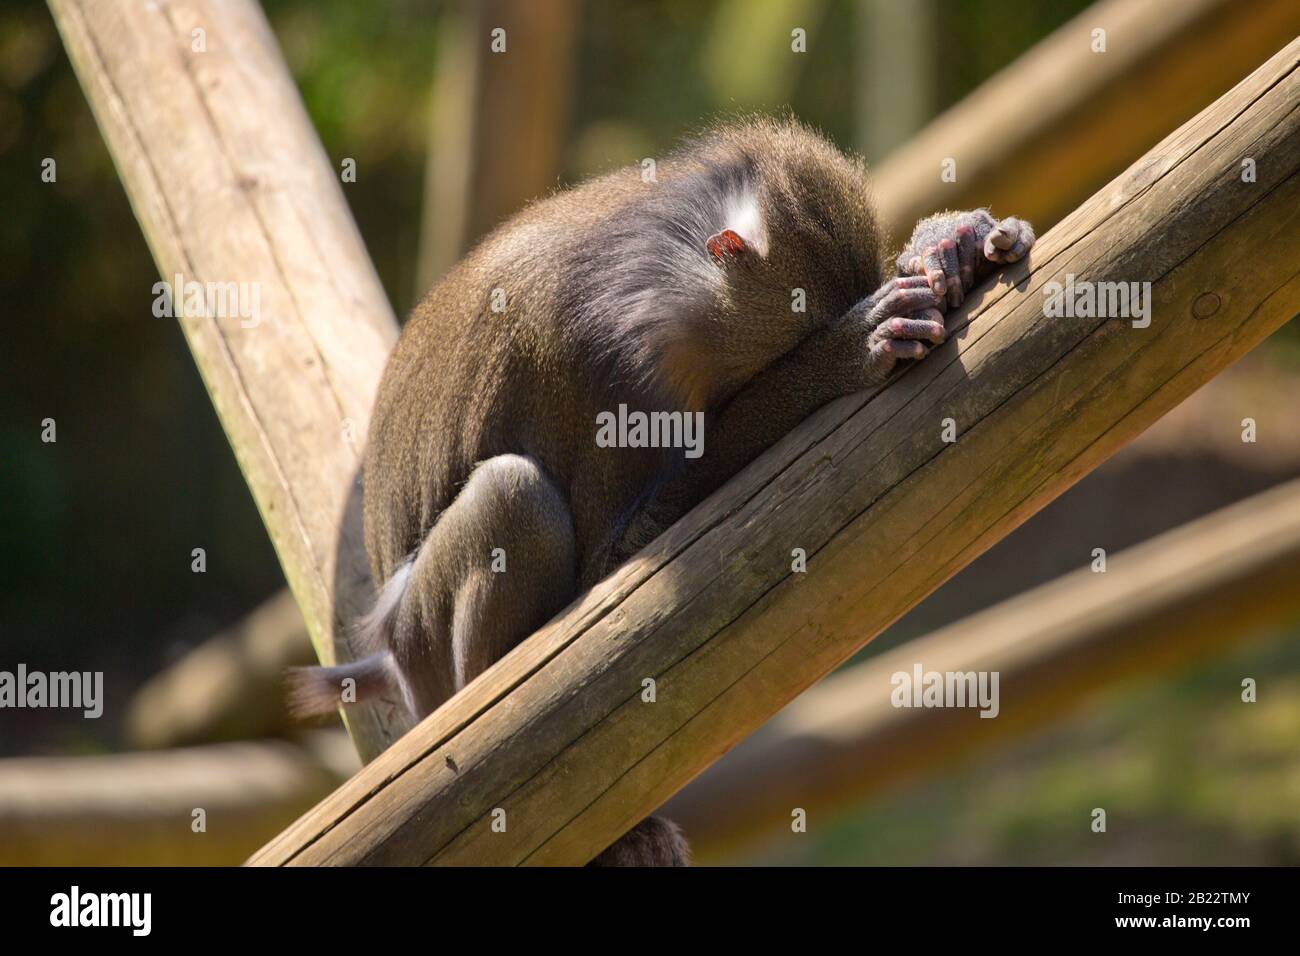 A small brown monkey in despair (or asleep) Stock Photo